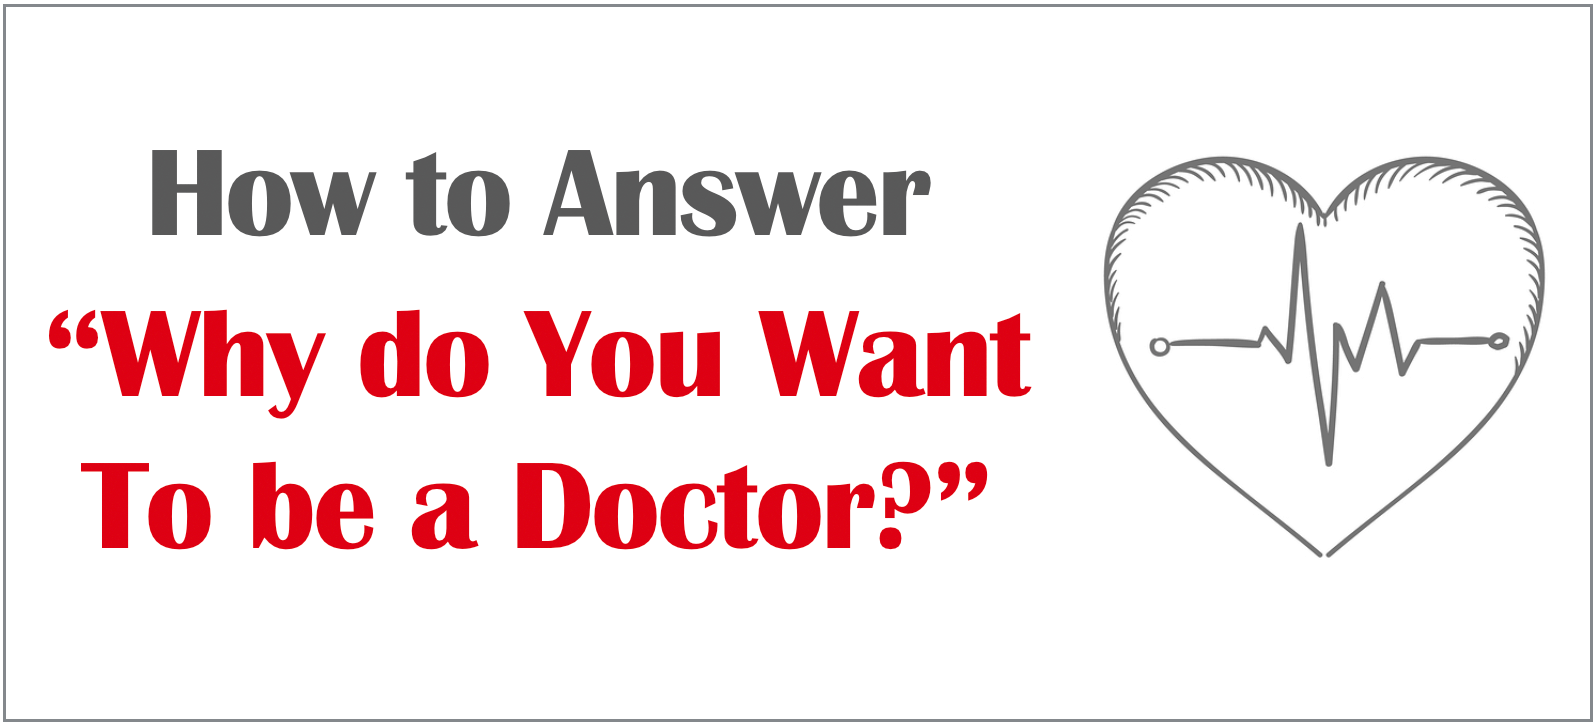 How to answer: Why do you want to be a doctor?